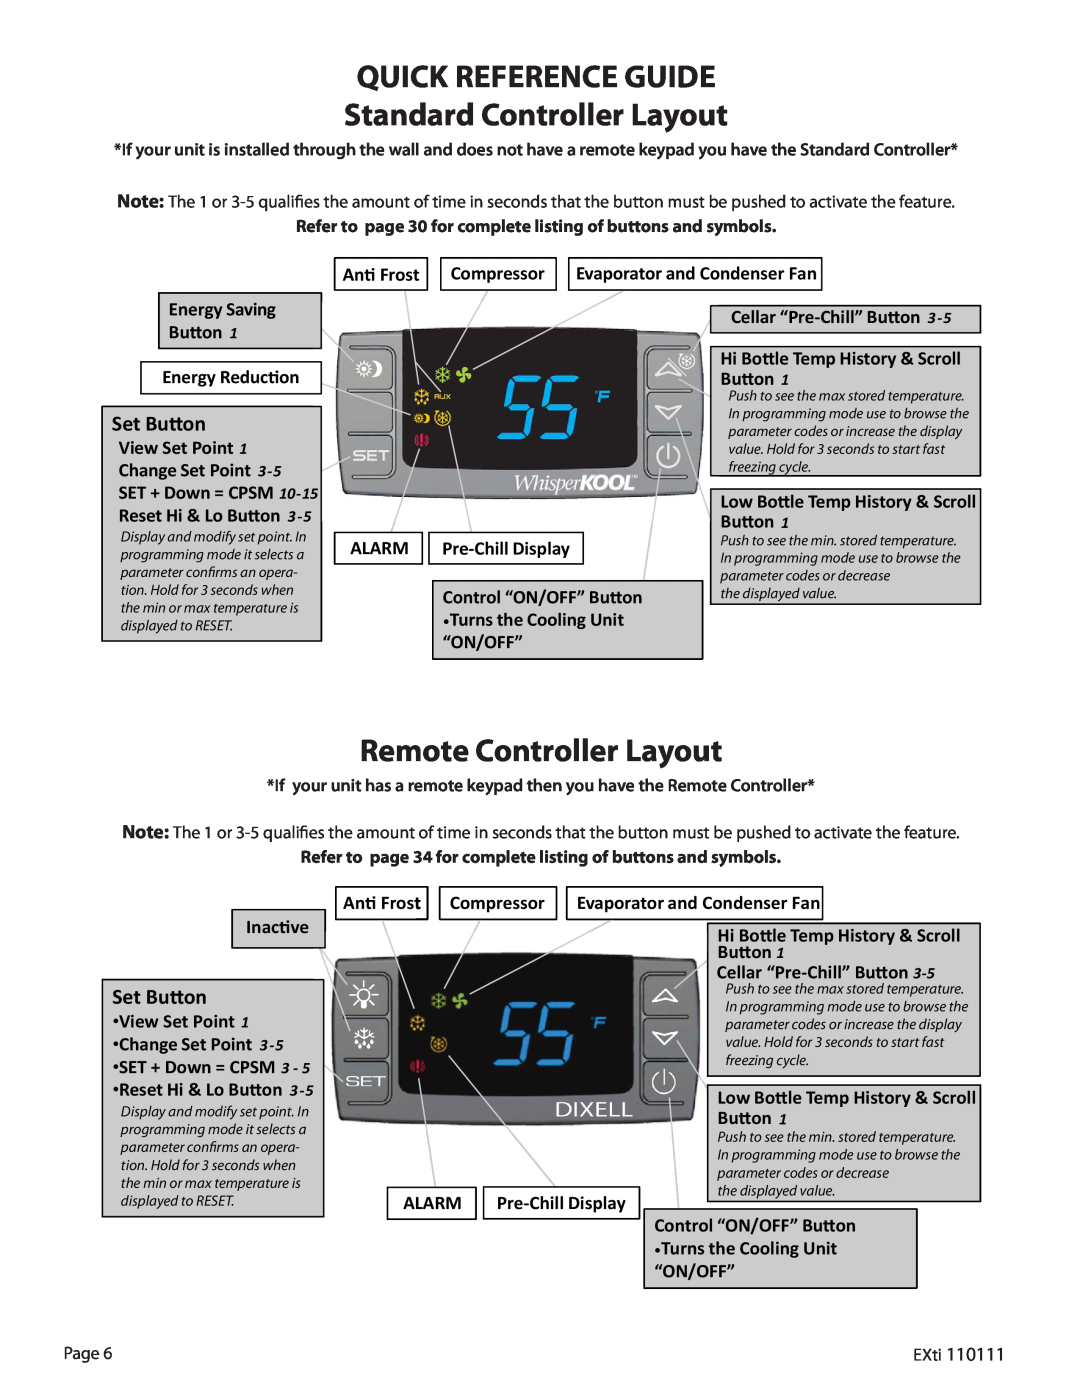 WhisperKool 5000 owner manual QUICK REFERENCE GUIDE Standard Controller Layout, Remote Controller Layout, Set Button 